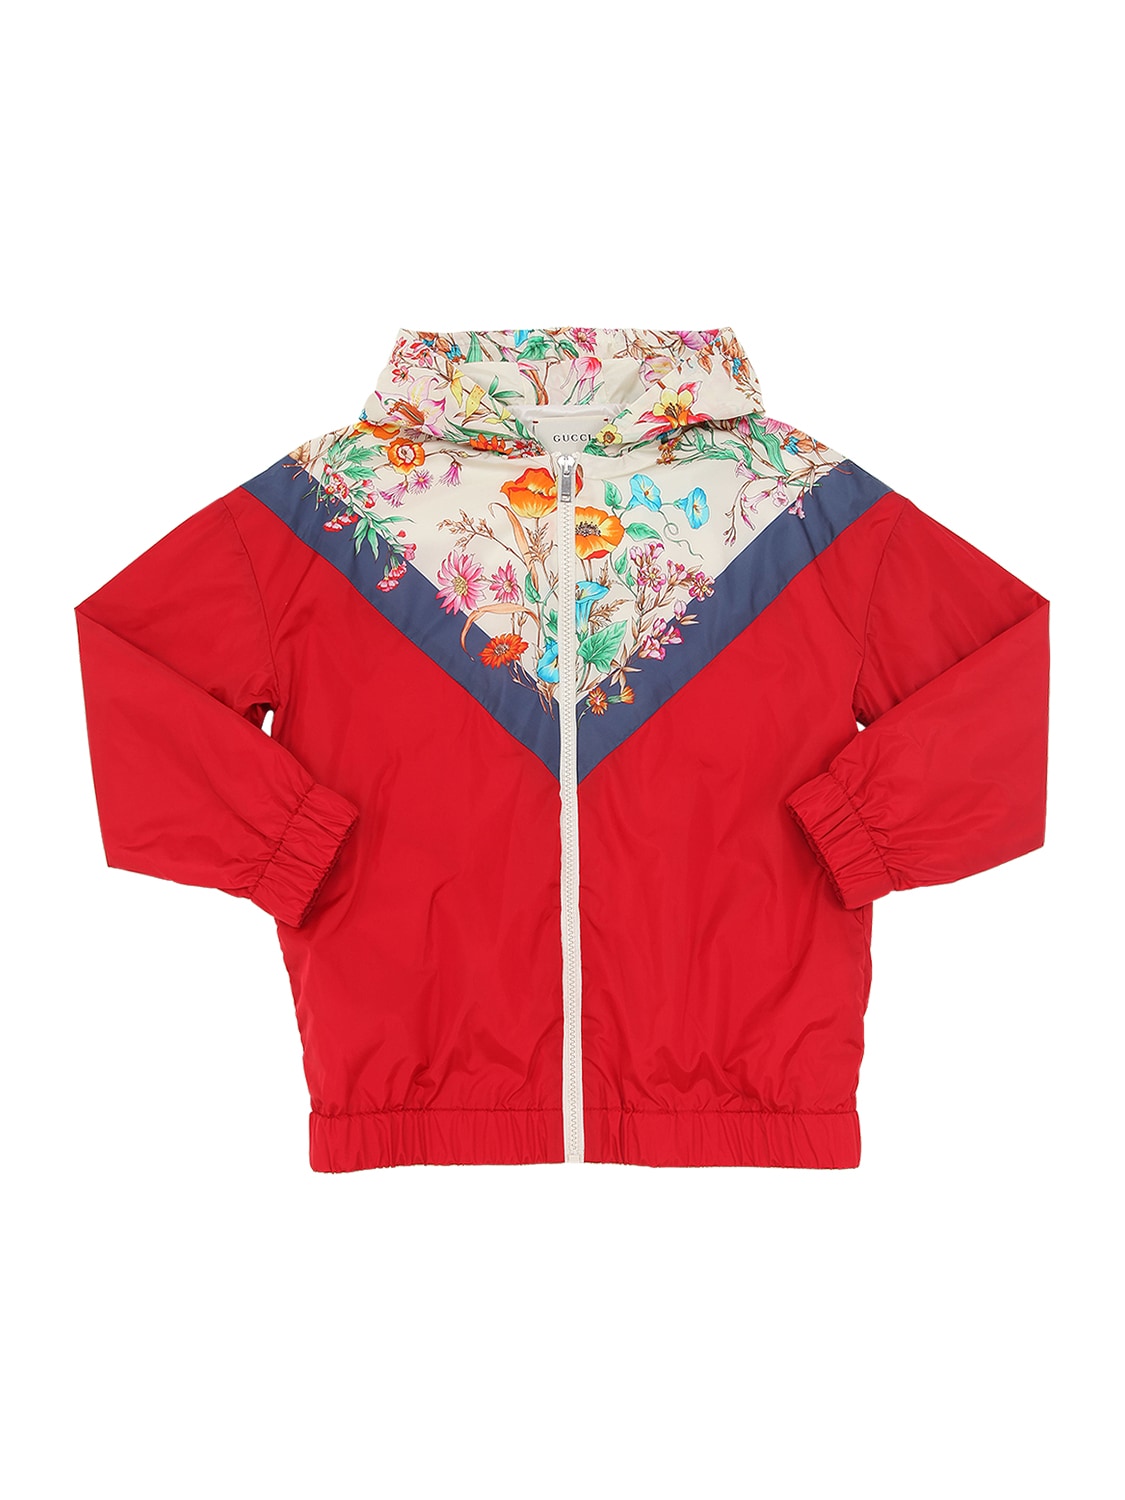 Gucci Kids' Floral Print Nylon Zip-up Jacket In Red,multi